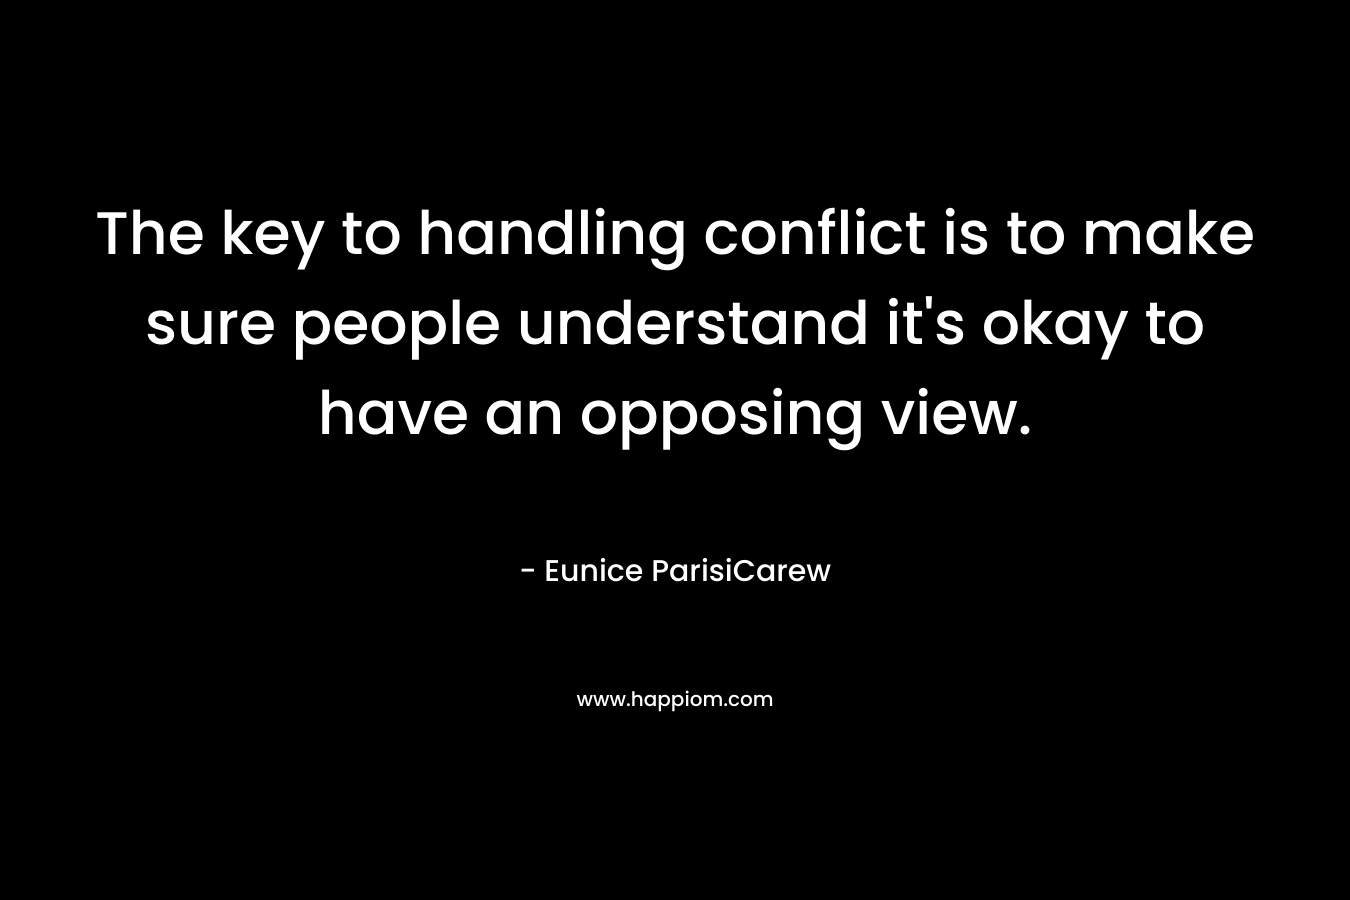 The key to handling conflict is to make sure people understand it’s okay to have an opposing view. – Eunice ParisiCarew